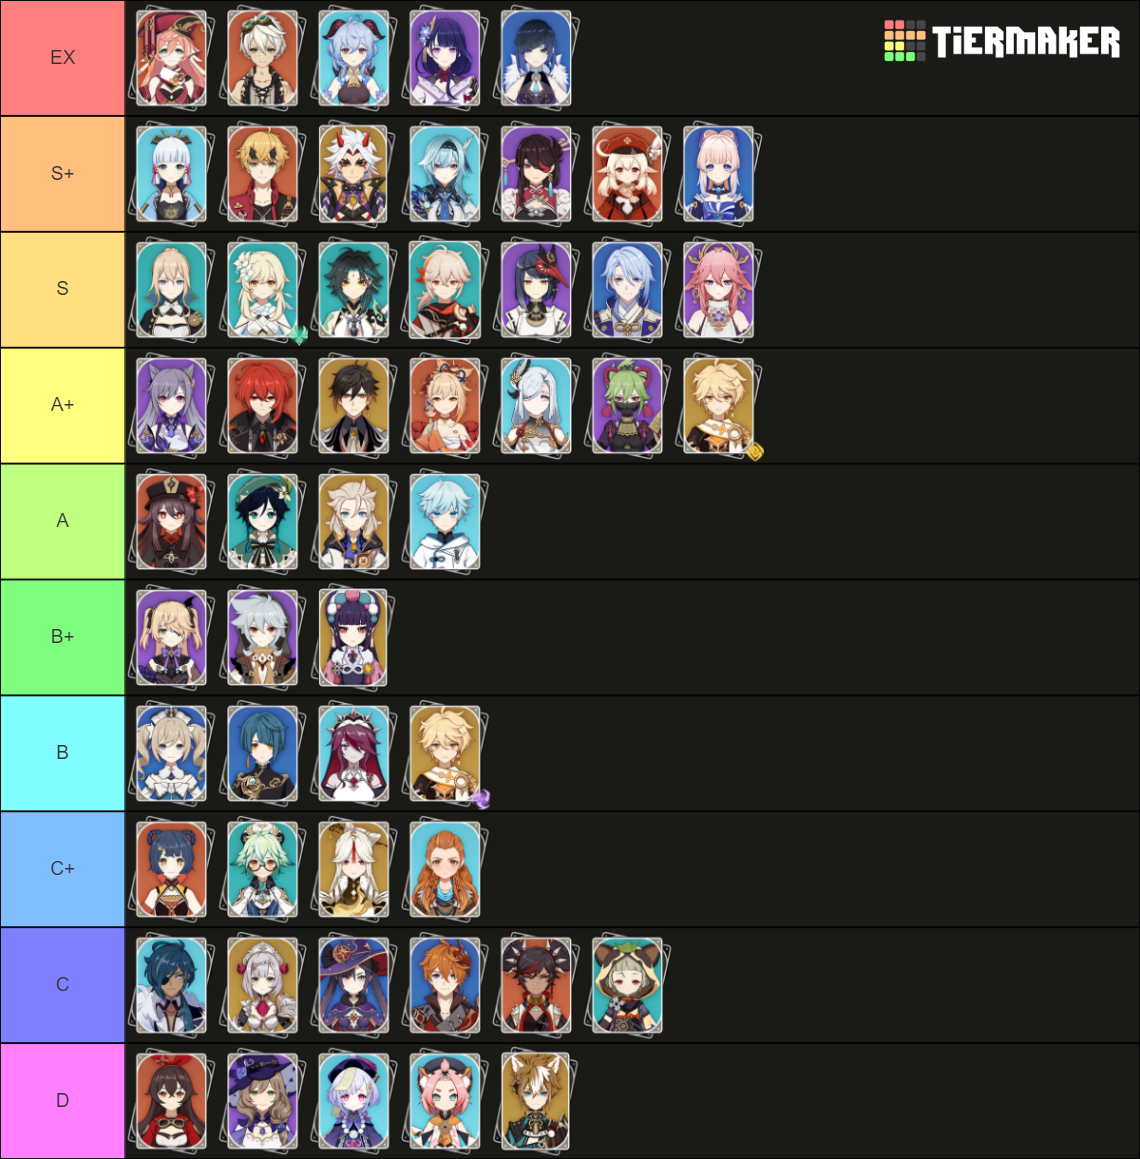 [GENSHIN IMPACT] All playable characters (2.8) *Updated Tier List